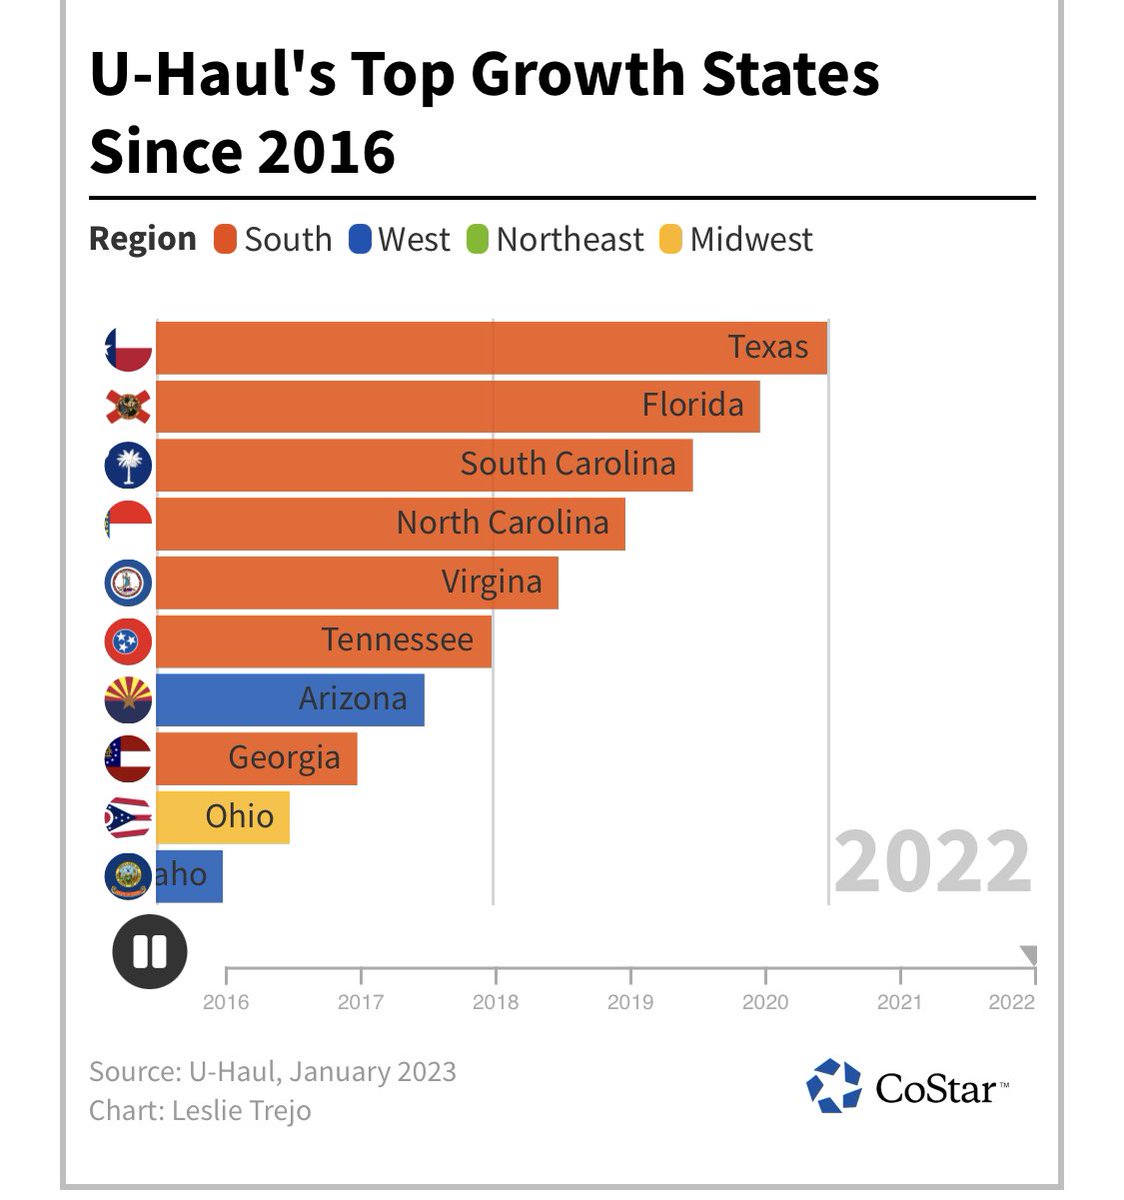 . #Texas remains a hot spot for #migration, ranking #1 in the country for net gain of one-way #UHaul truck arrivals for 2nd year in a row. #SunBelt states continue to dominate migration patterns, as reported by U-Haul's annual #growthindex. #realestate #moving